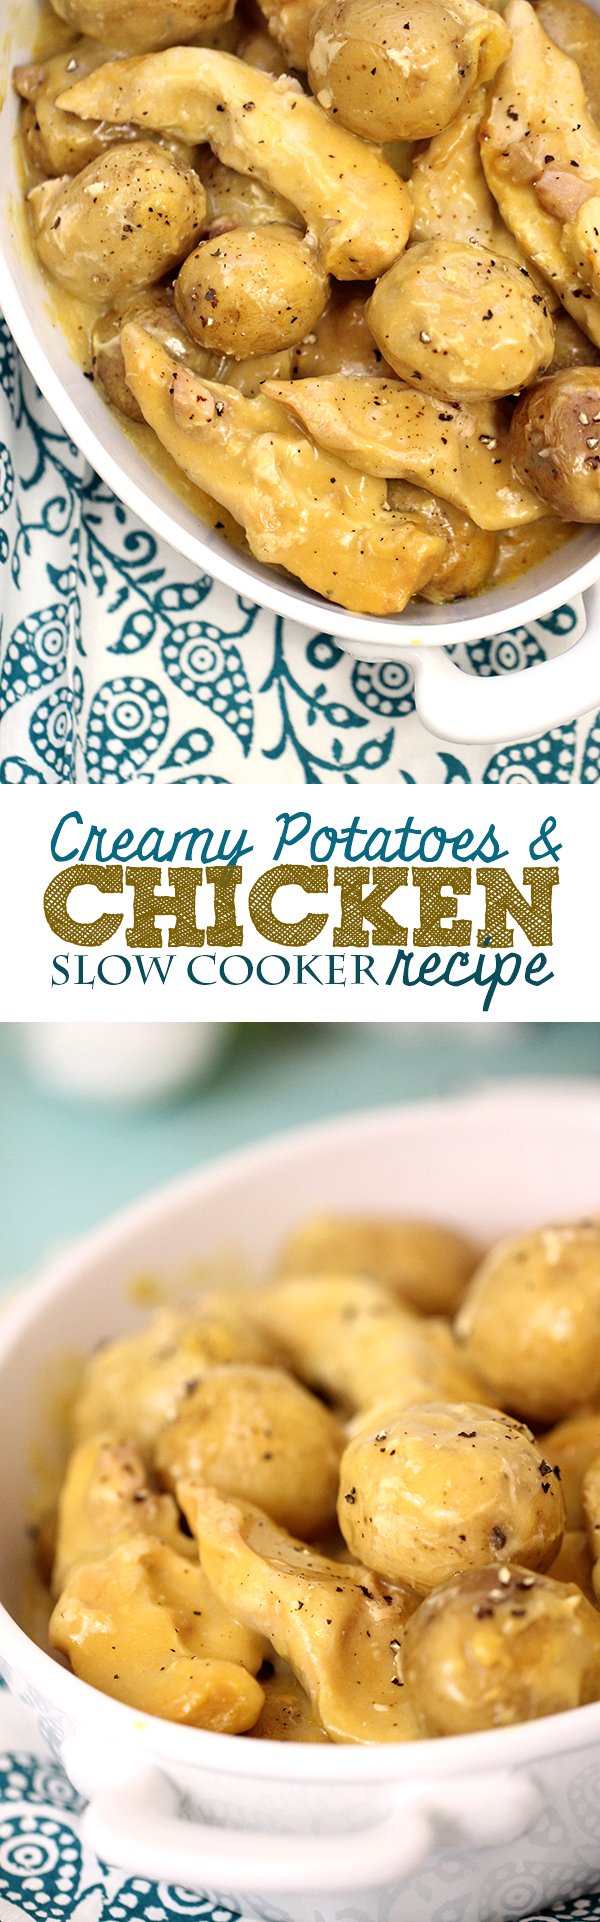 Perfect weeknight meal. Tasty and simple creamy potato chicken with only 3 ingredients!